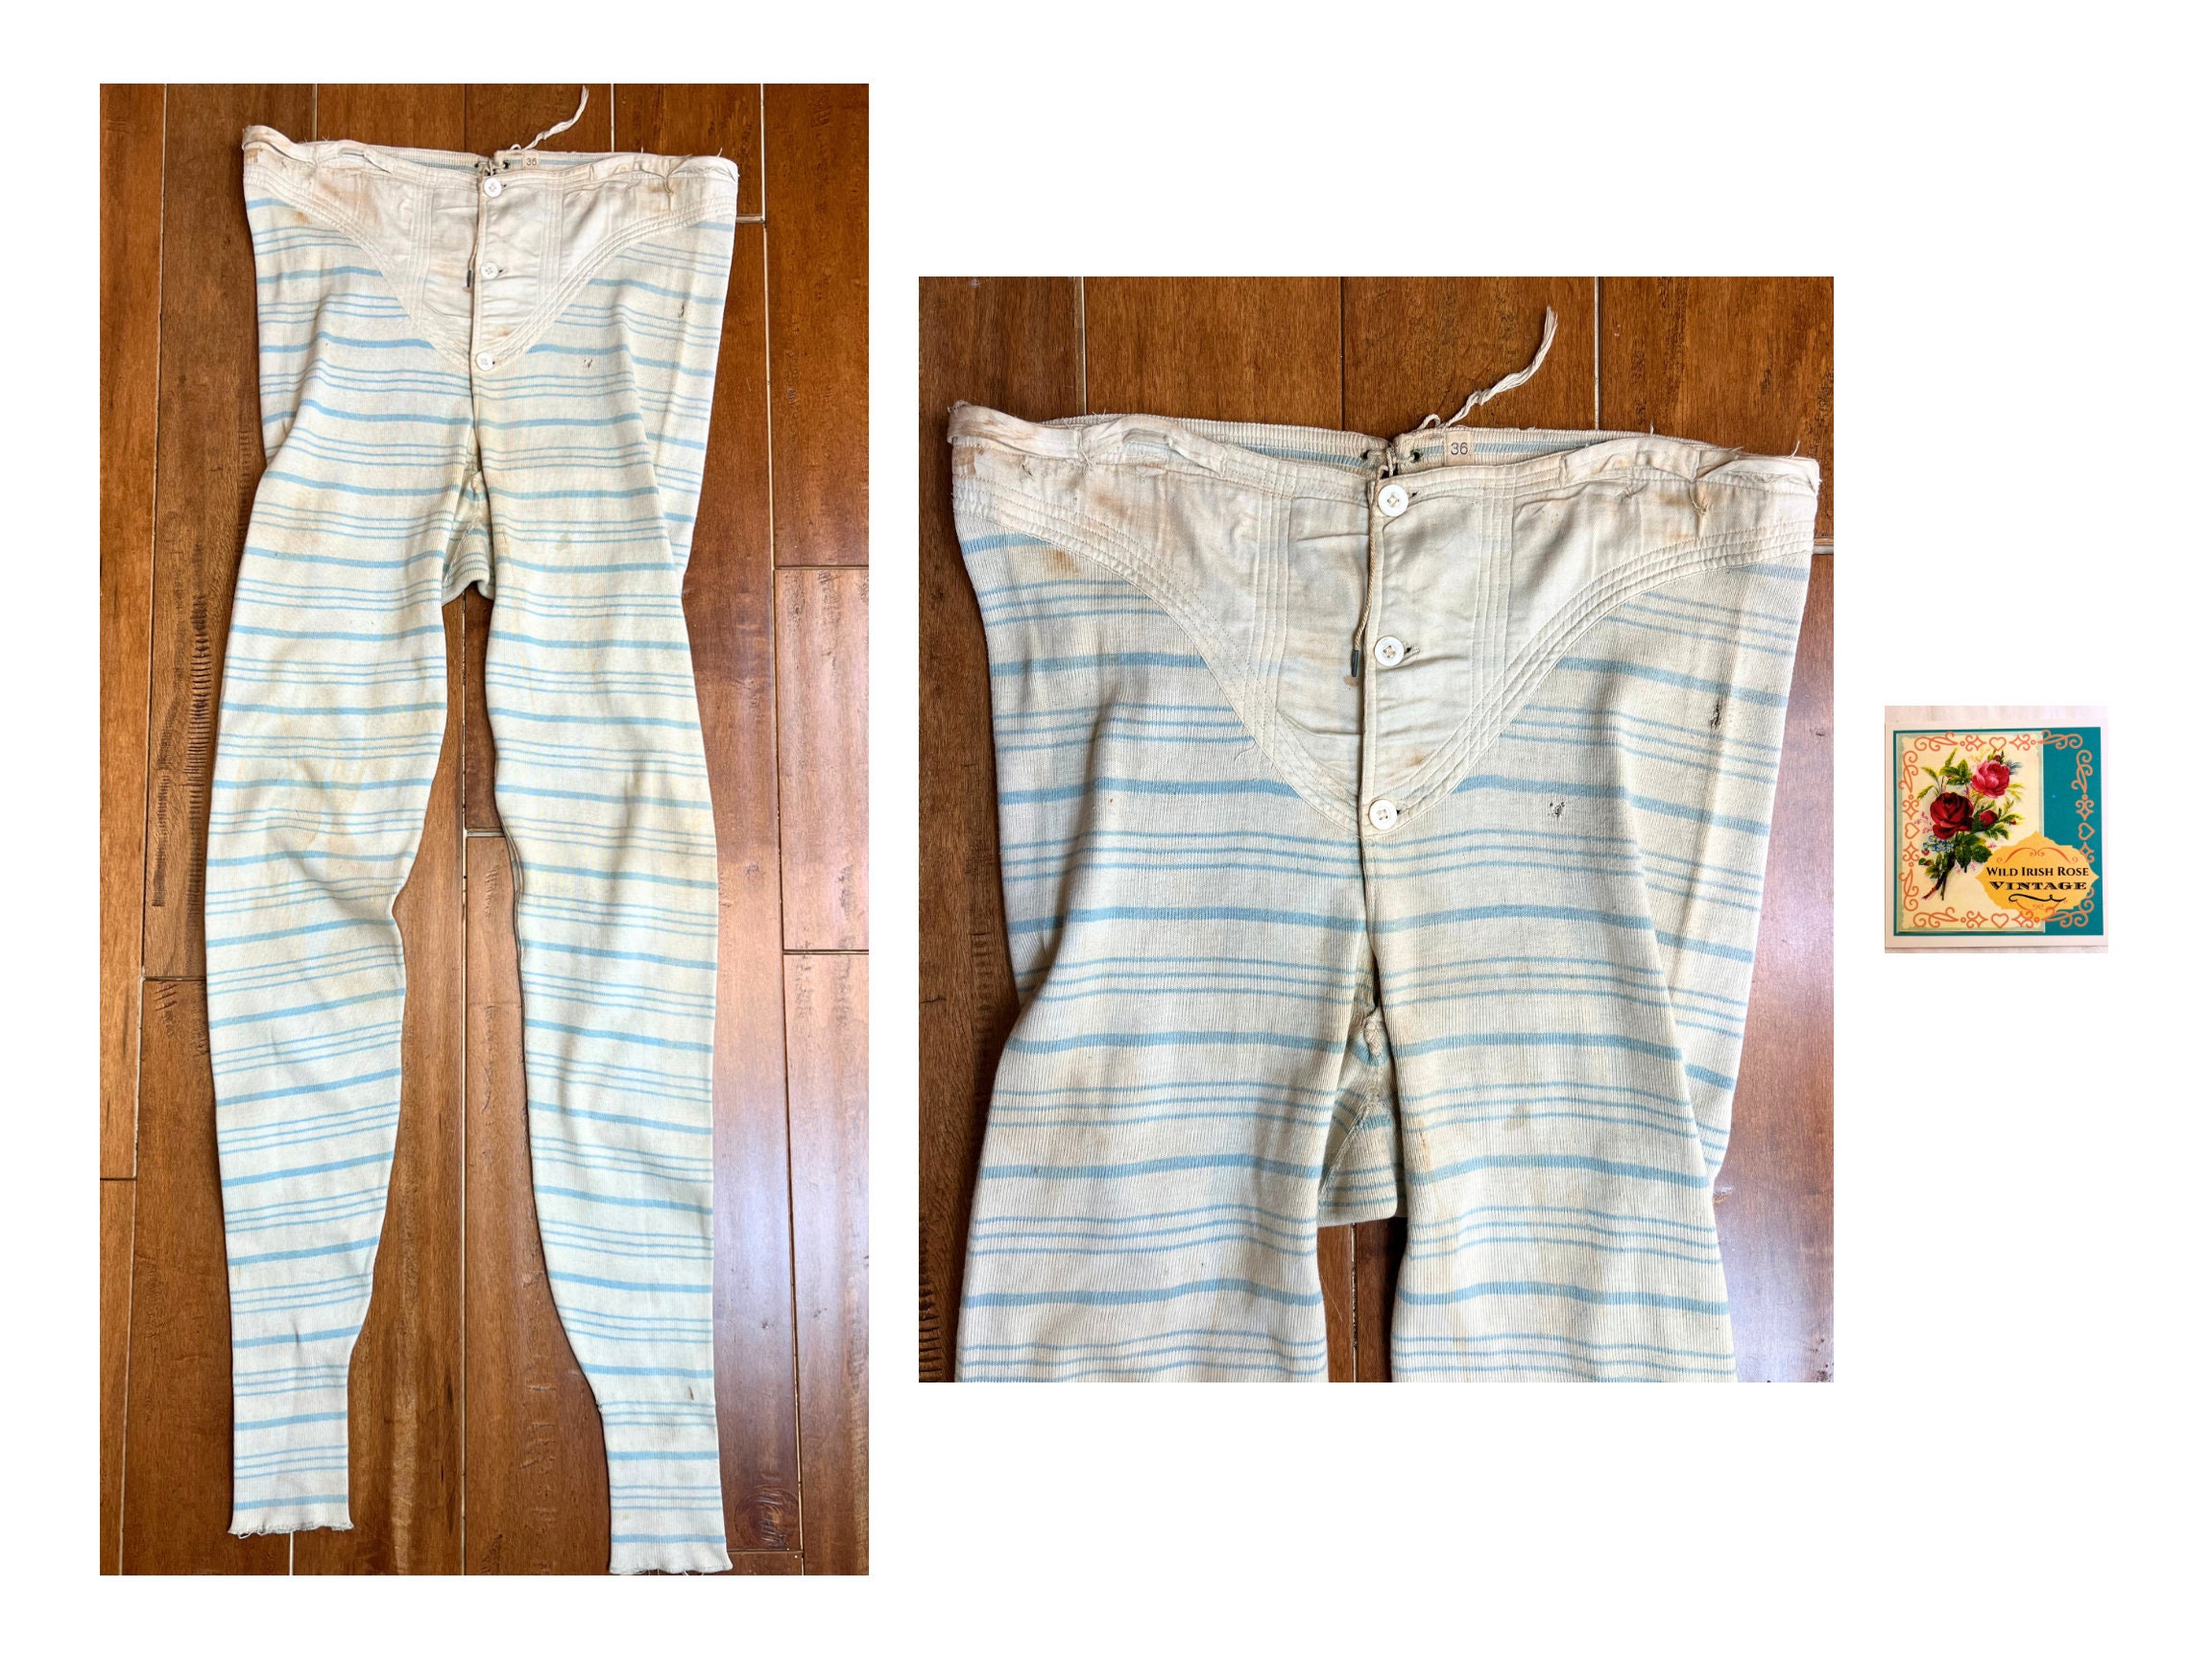 VINTAGE 1930s Wrights Health Underwear, Wool & Cotton Union Suit, Drawers  or Long Underwear -  Canada